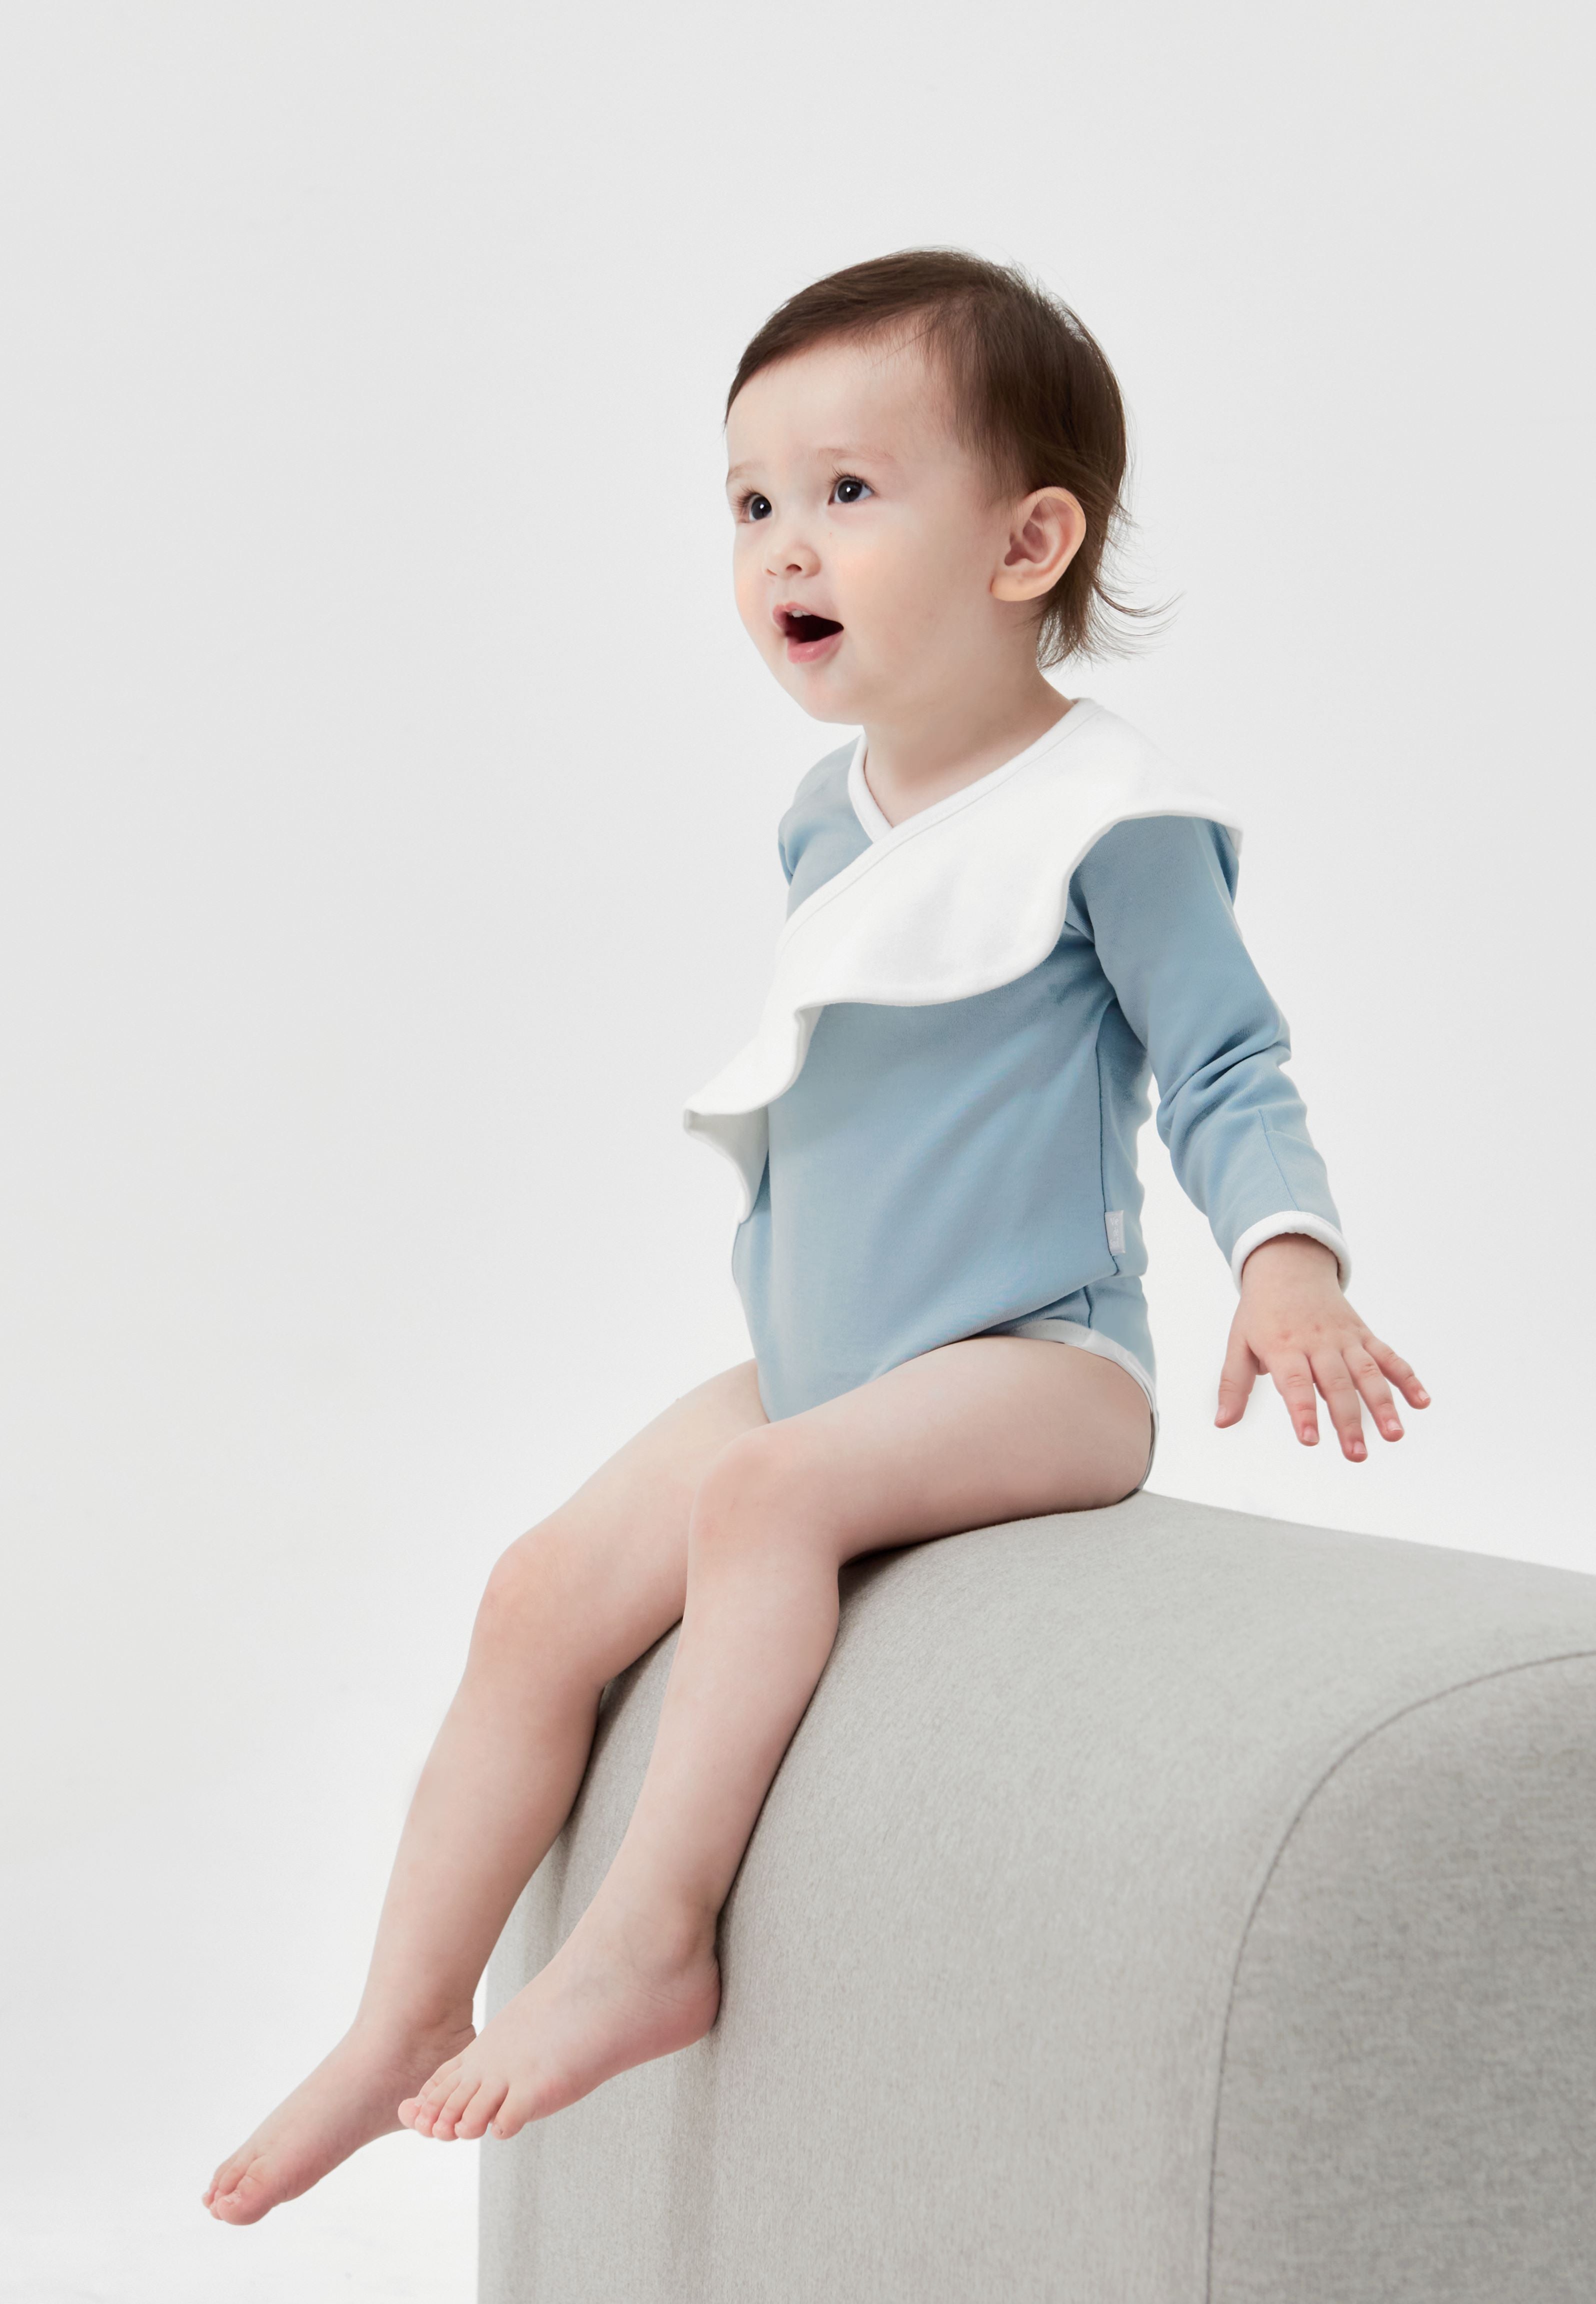 Misty Blue Ruffle Bodysuit: Adorable, wavy ruffle design with open button style. Versatile for special occasions or outdoor wear.